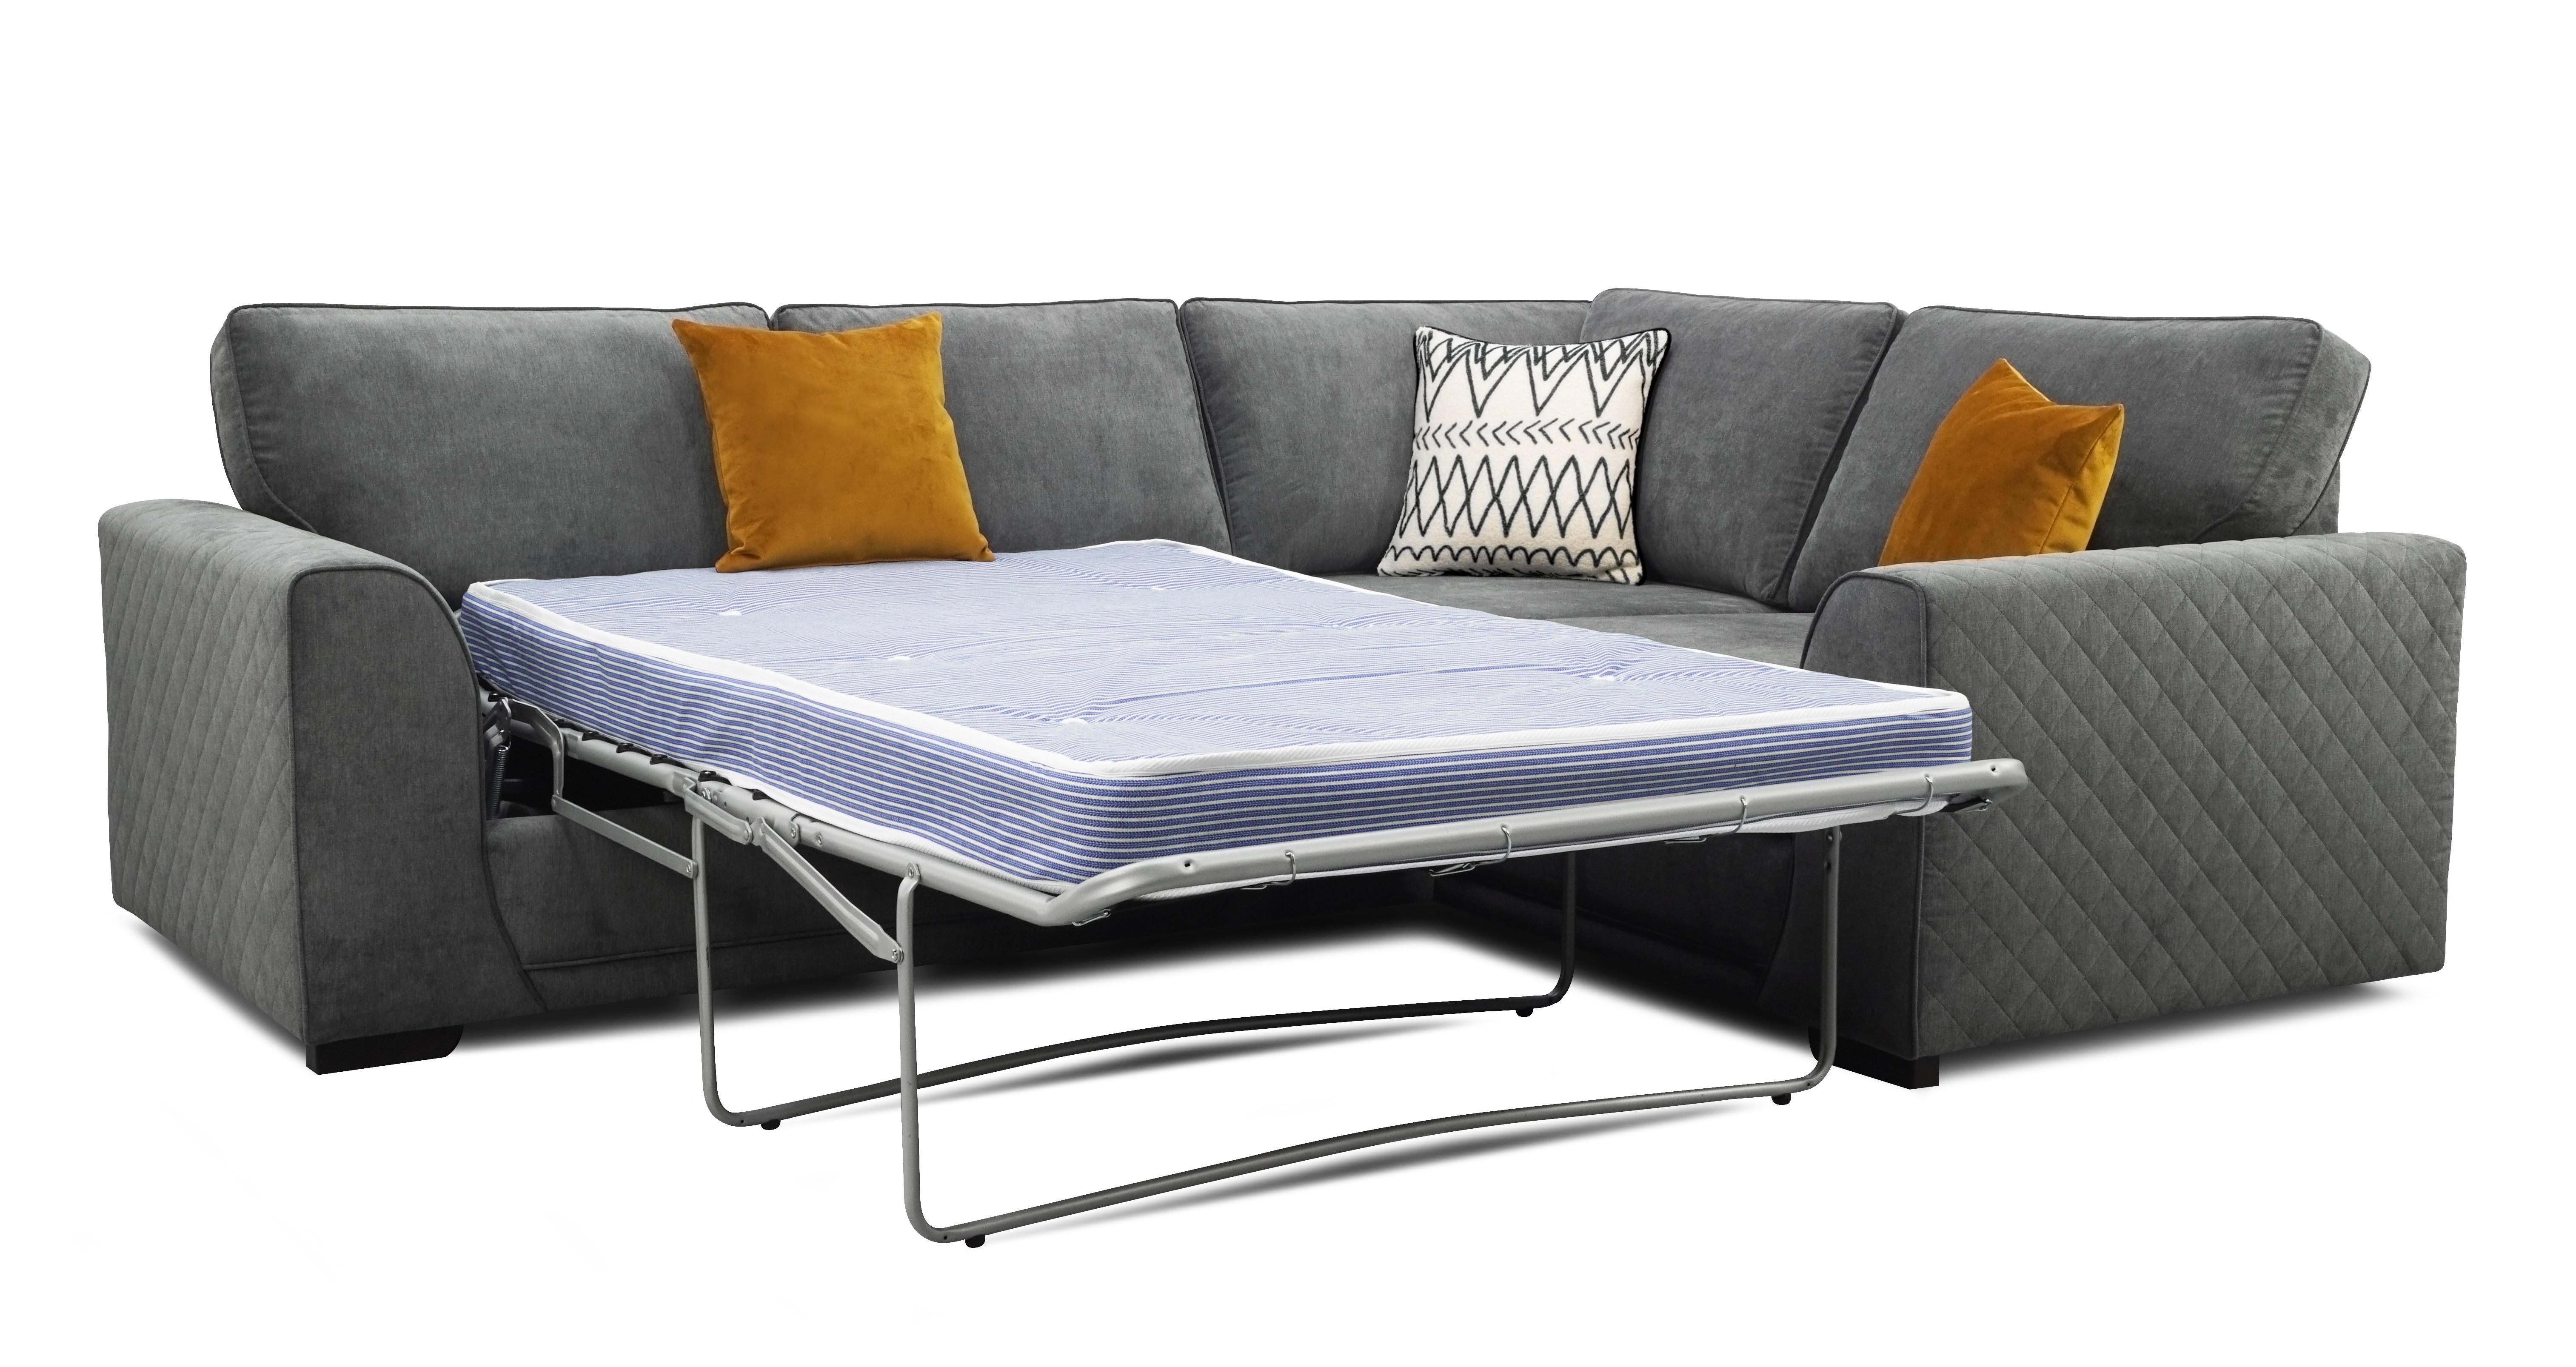 dfs deluxe sofa bed reviews